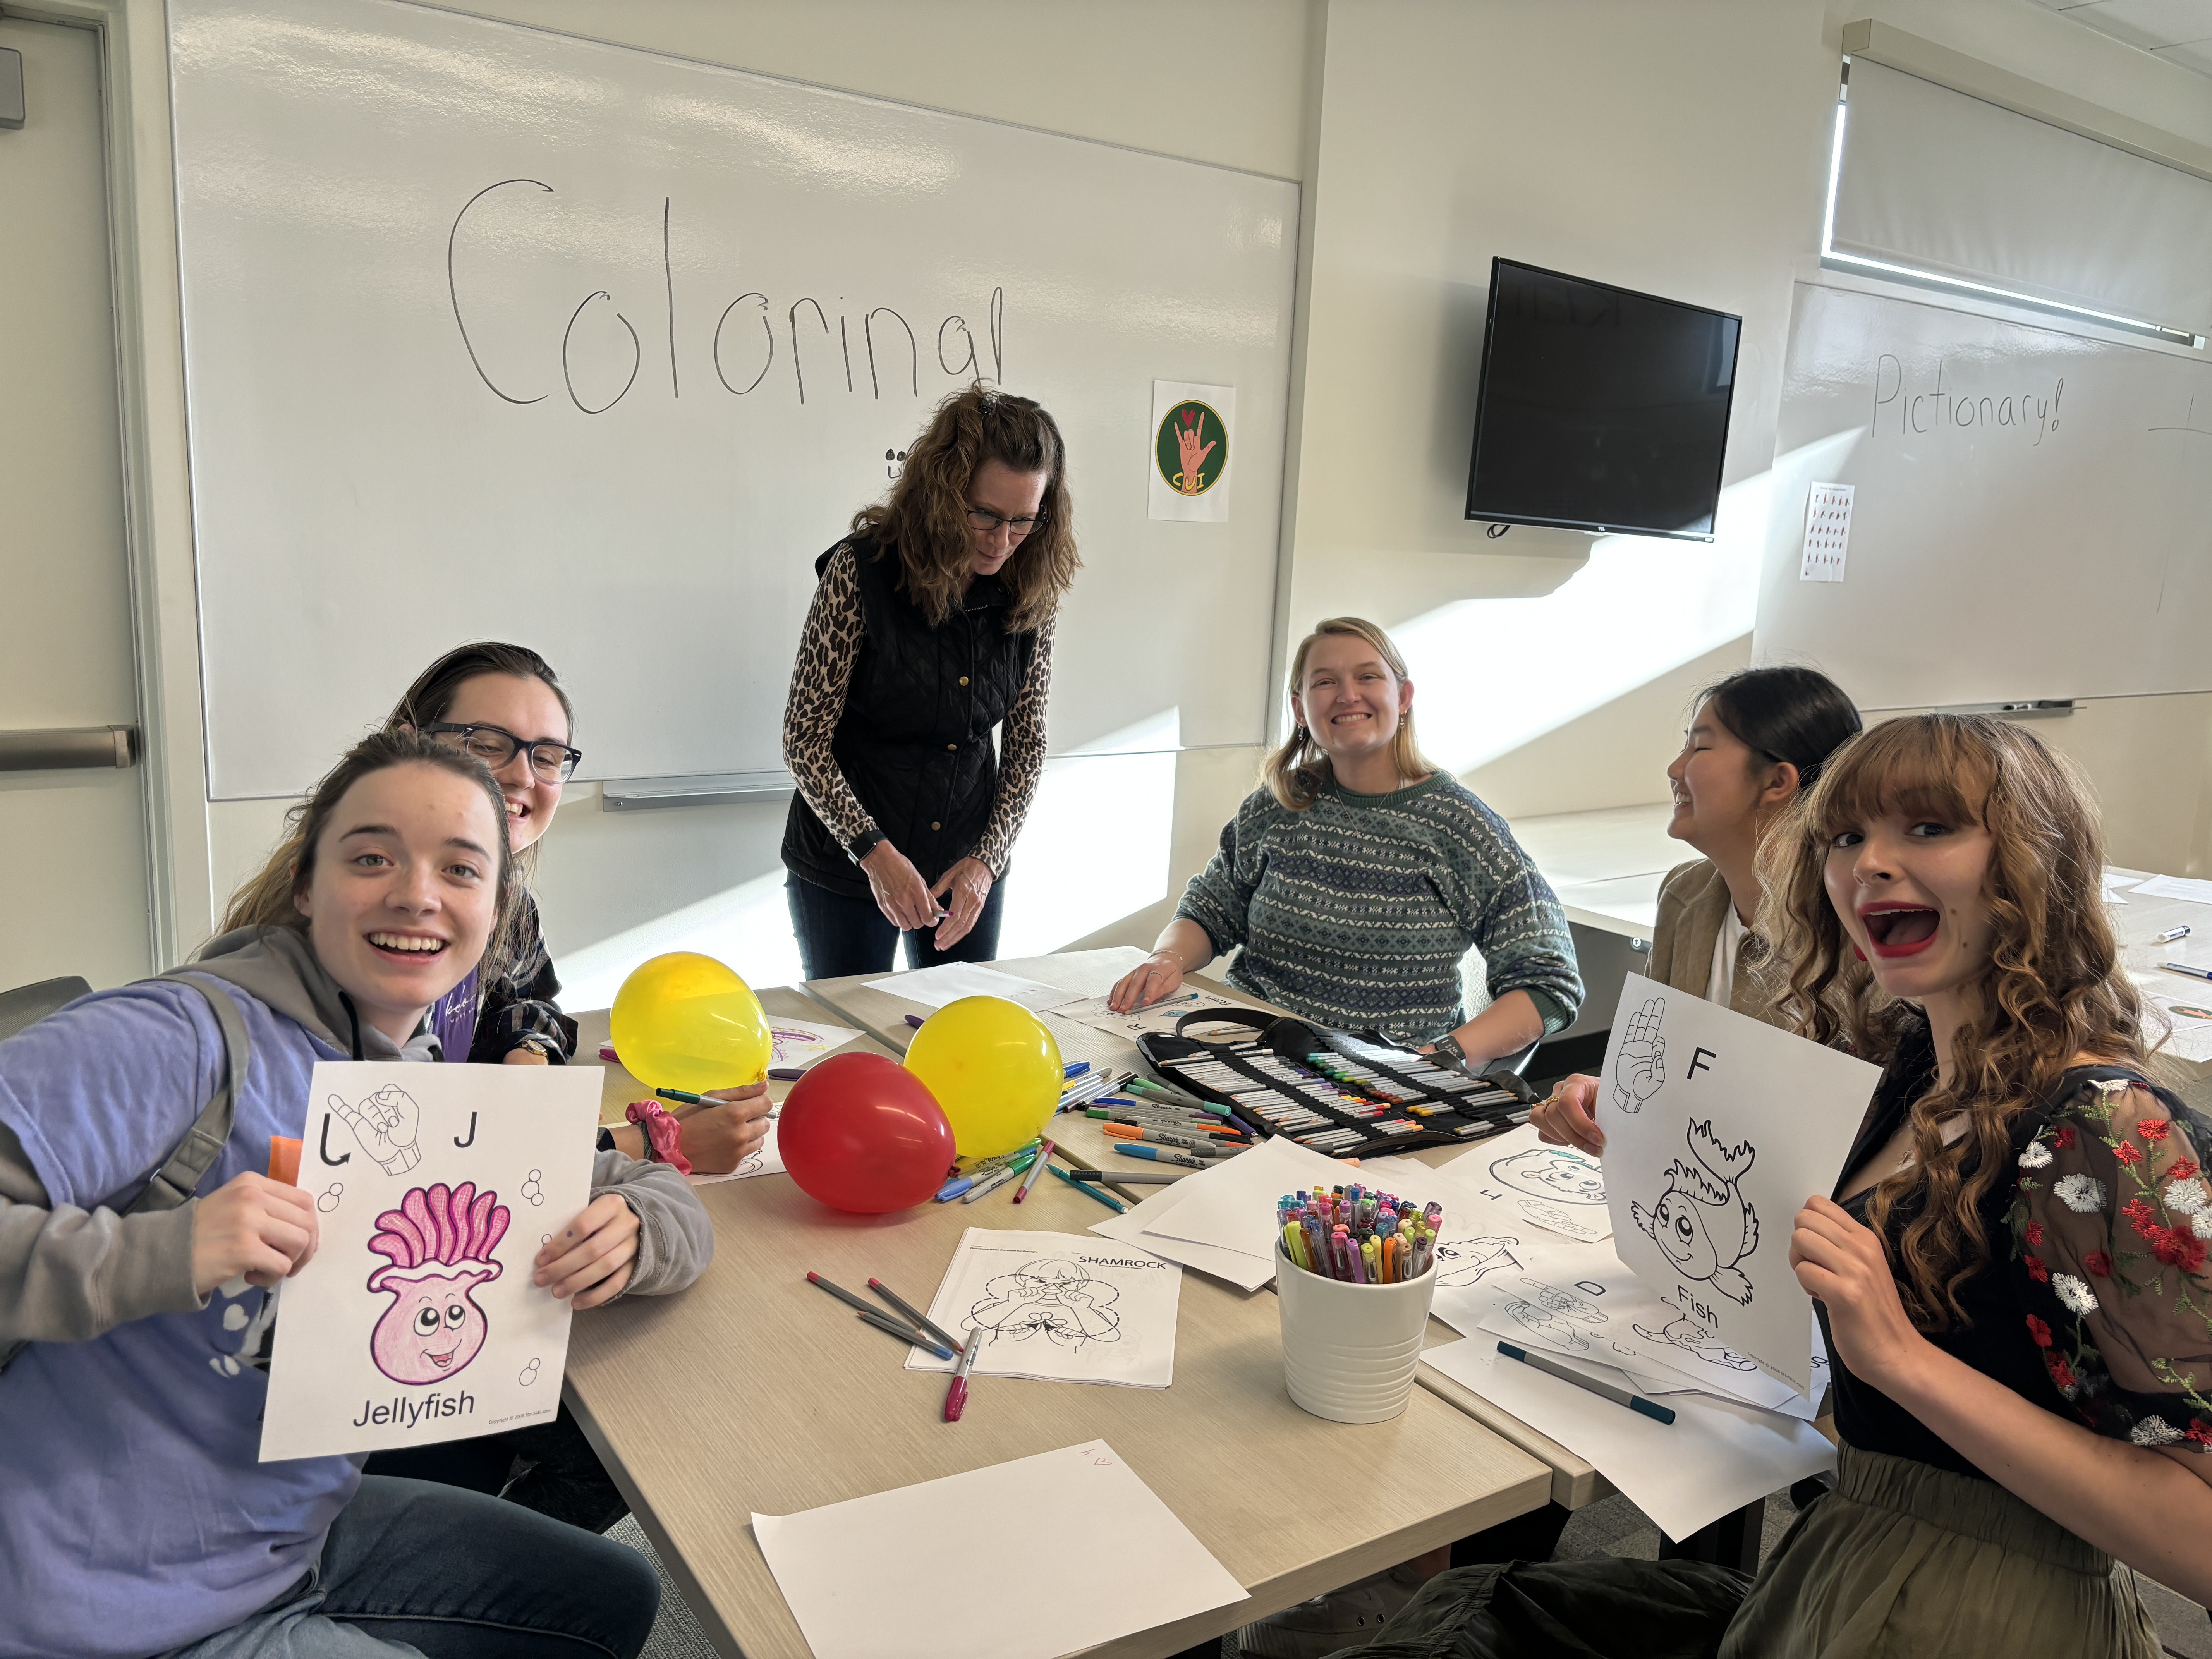 Students at the silent dinner event got the opportunity to participate in different activities such as coloring.